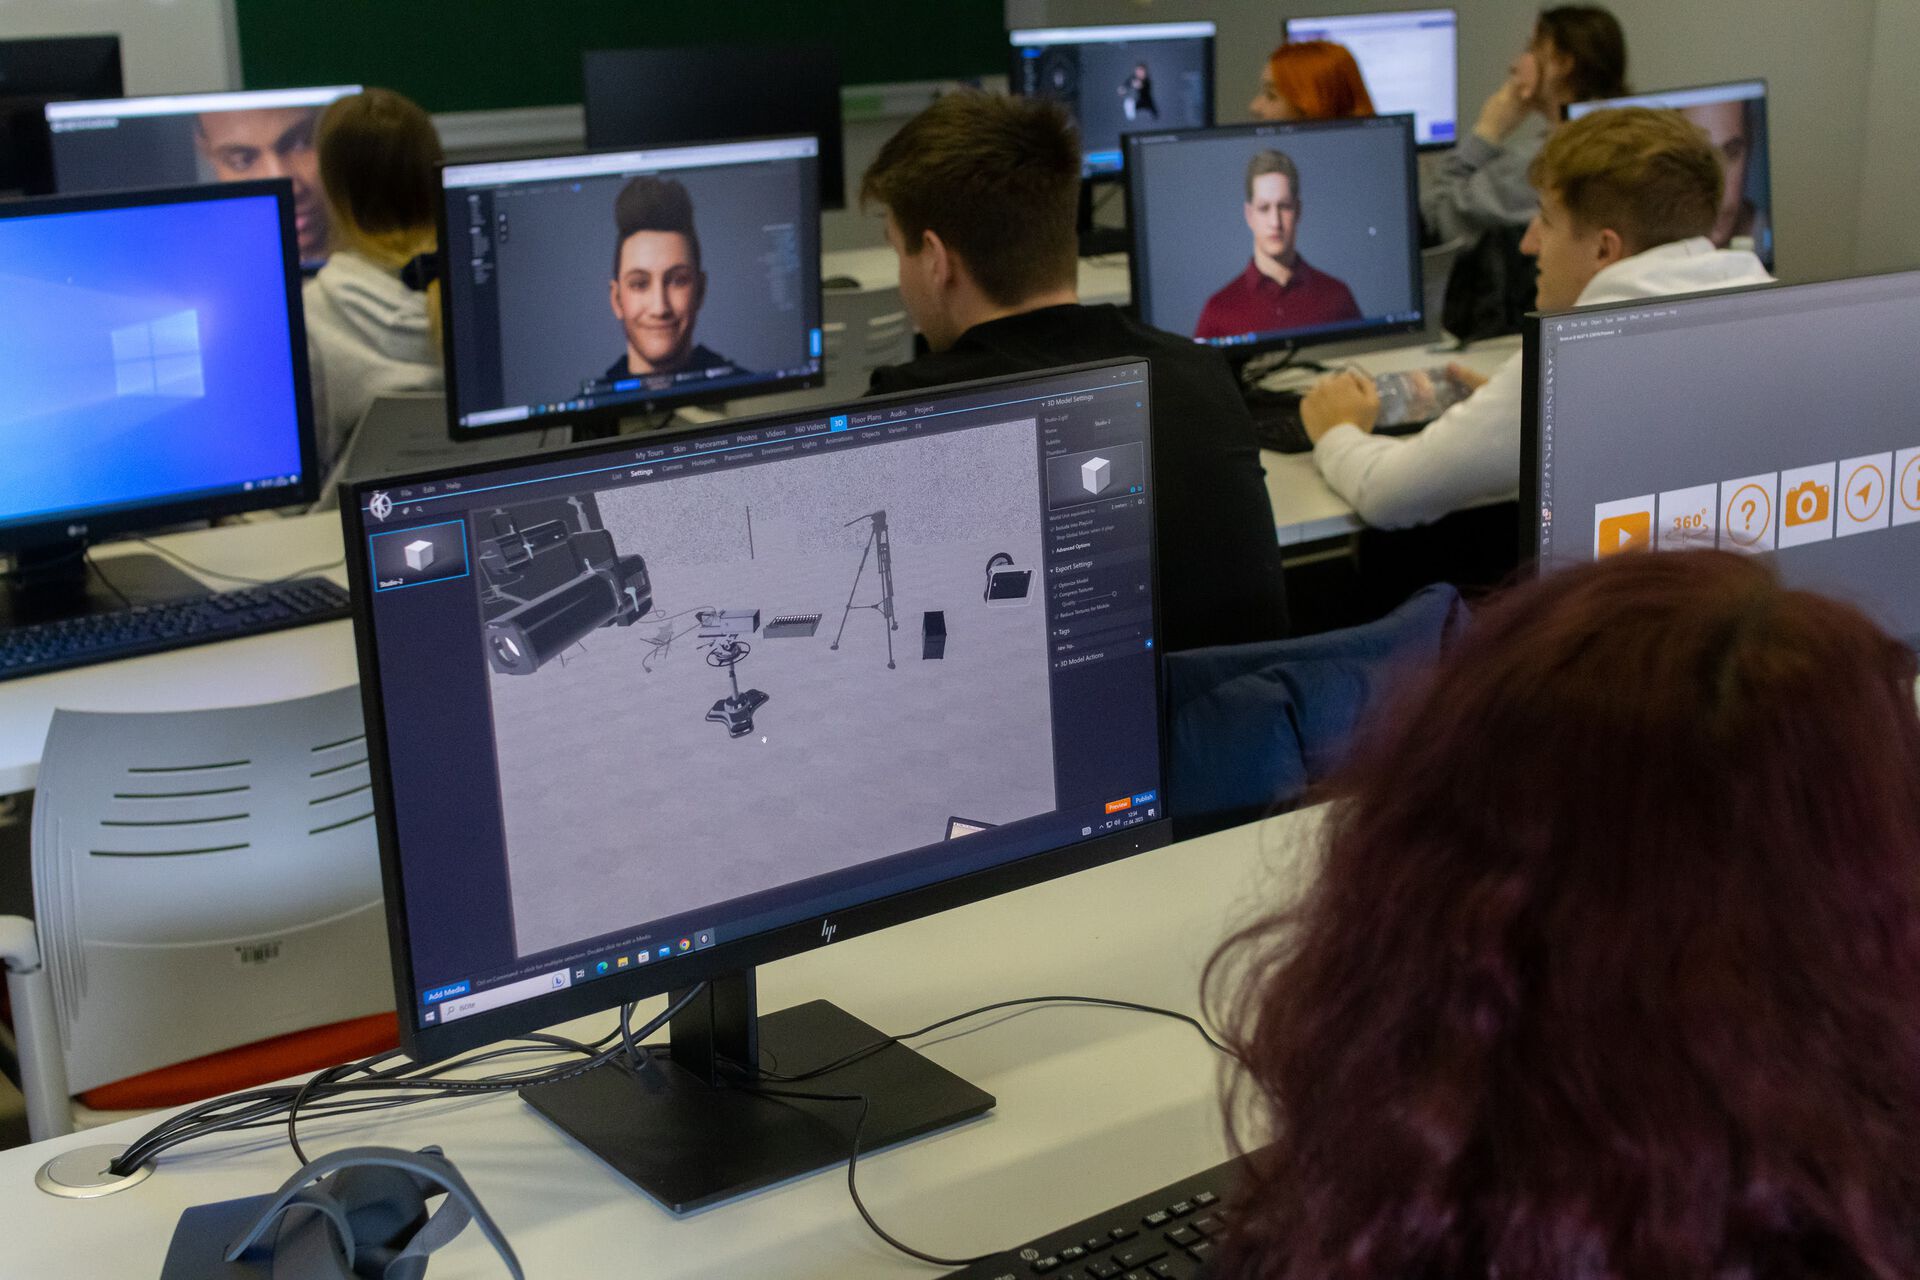 Students plan to make their own movie using CGI (Computer-generated imagery) technology